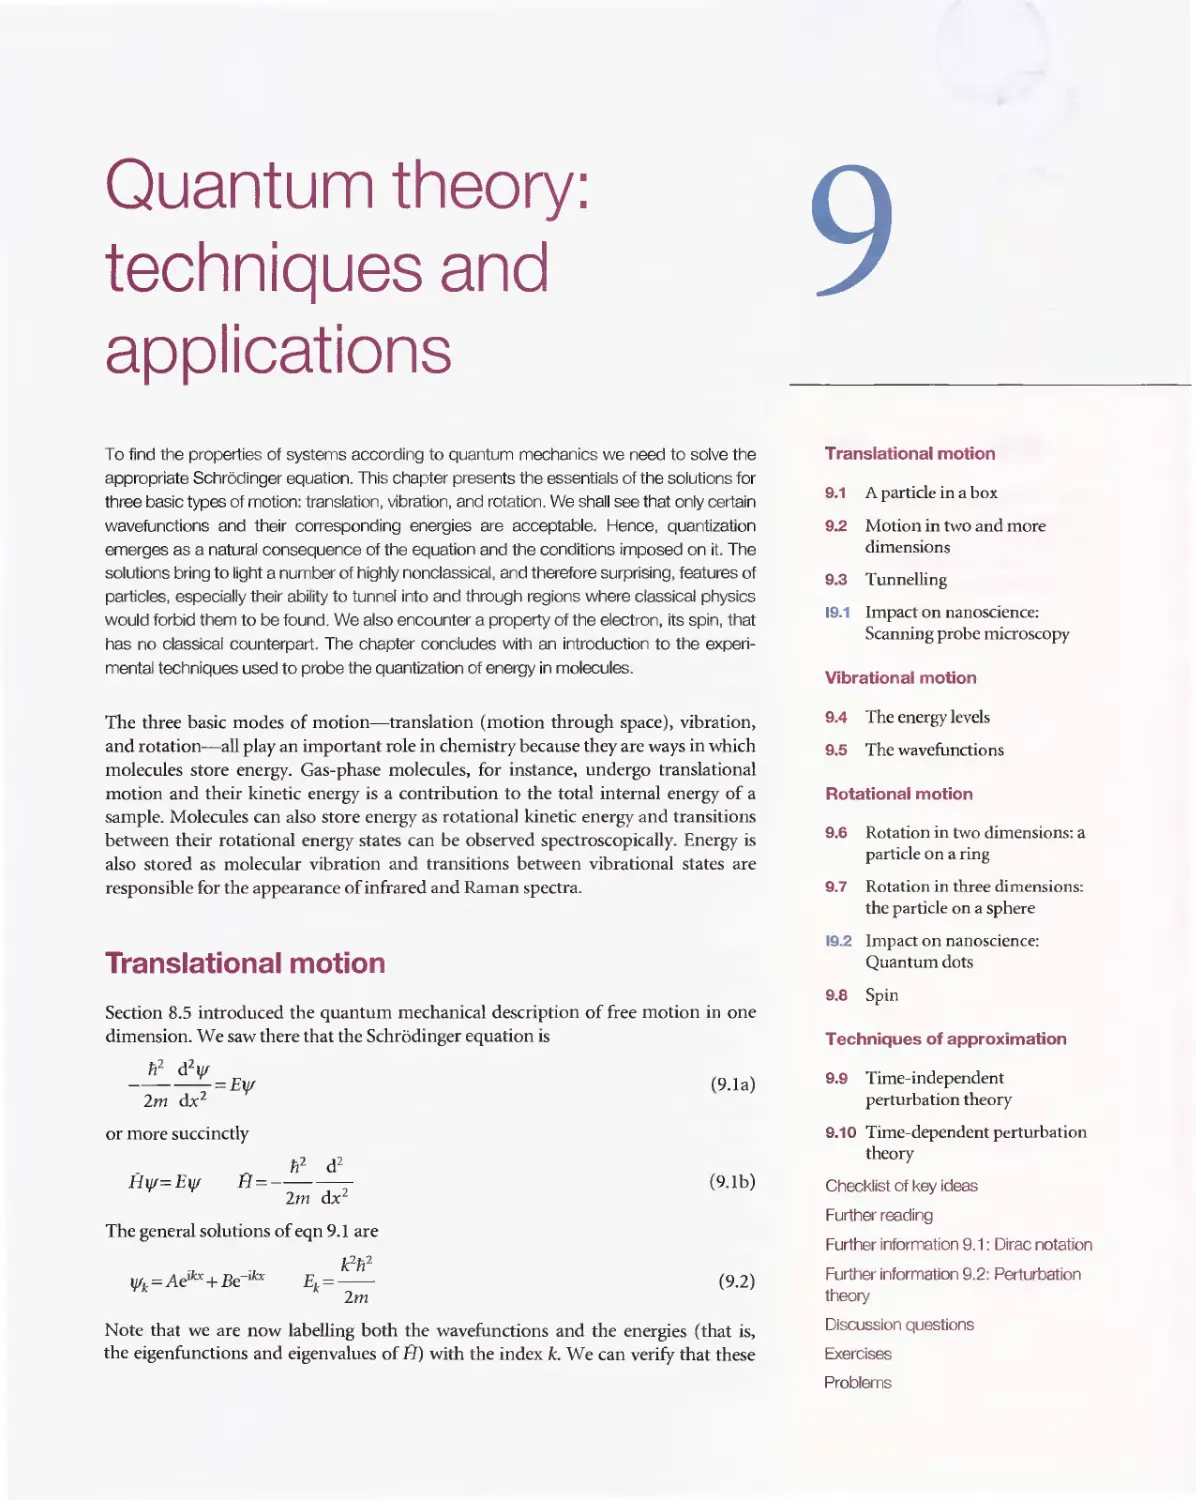 9 - Quantum theory - Techniques and applications